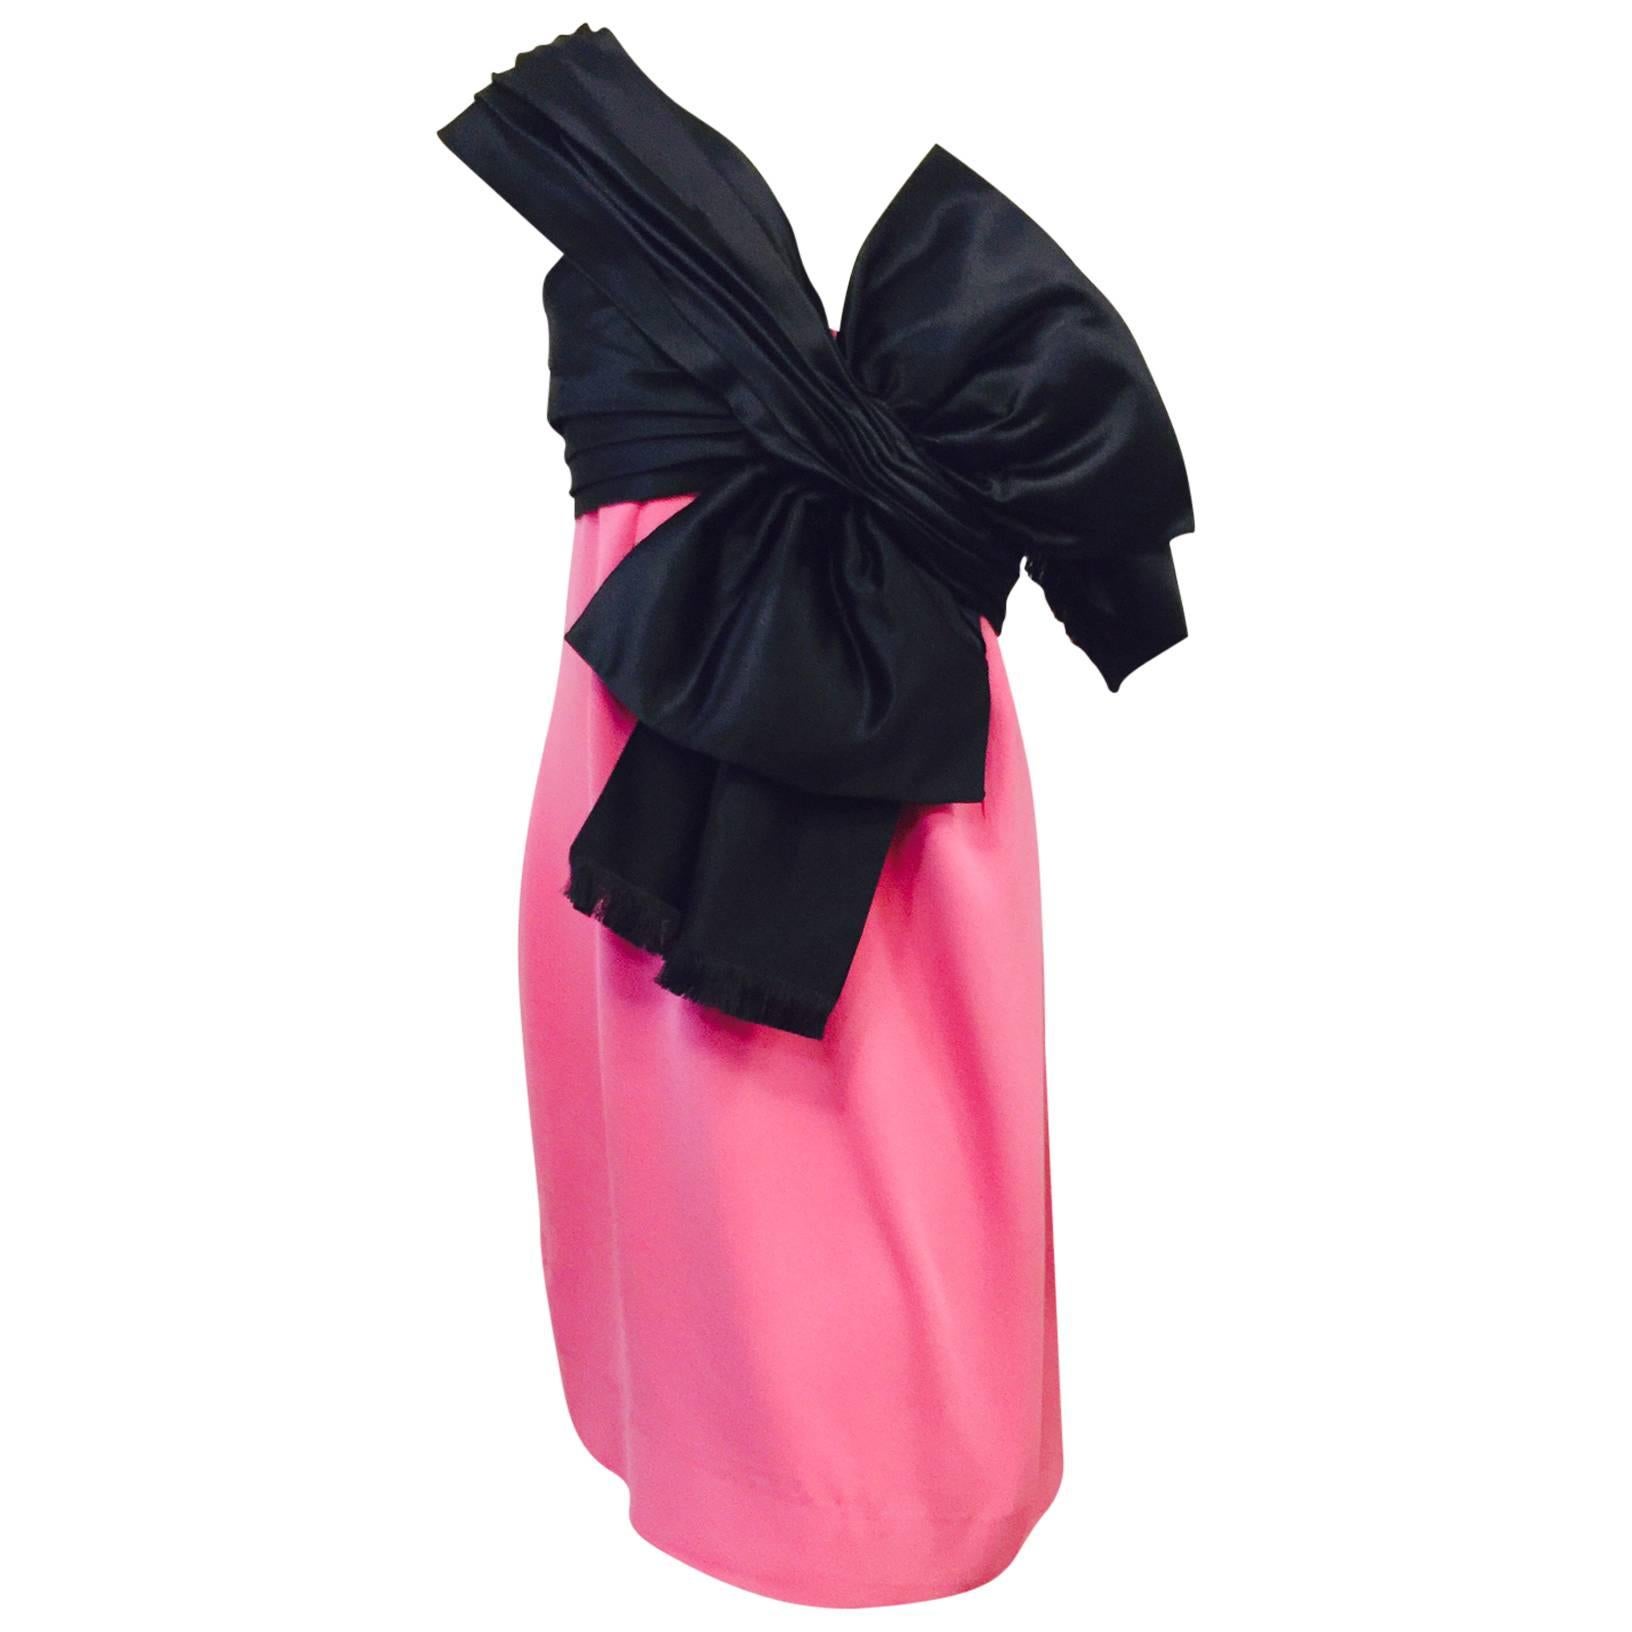 Christian Dior Boutique Black & Pink Silk One Shoulder Cocktail Dress With Bow For Sale